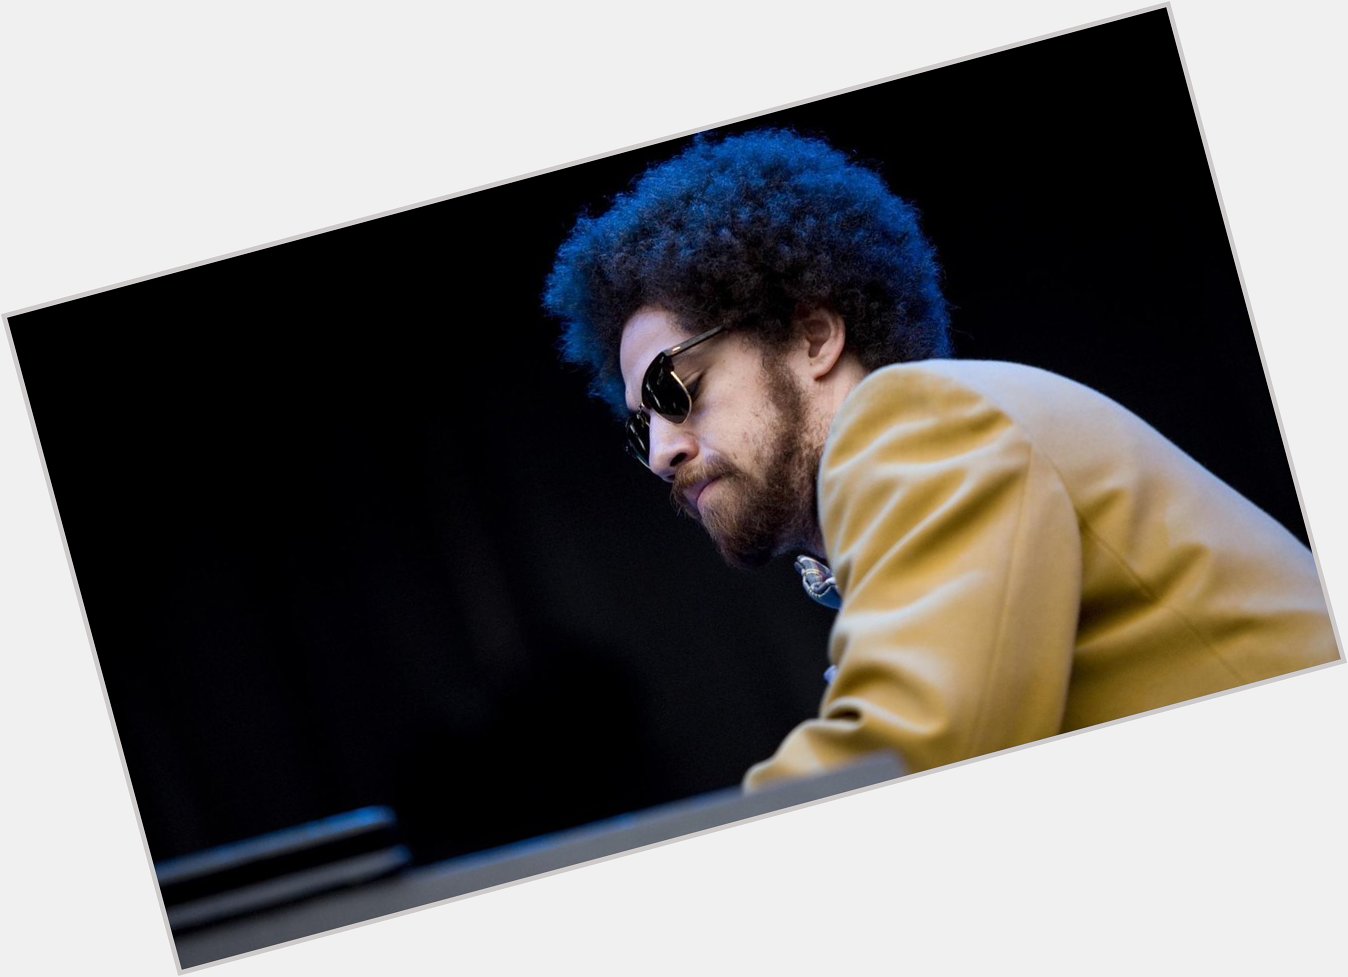 Salute and Happy Birthday Danger Mouse !! 